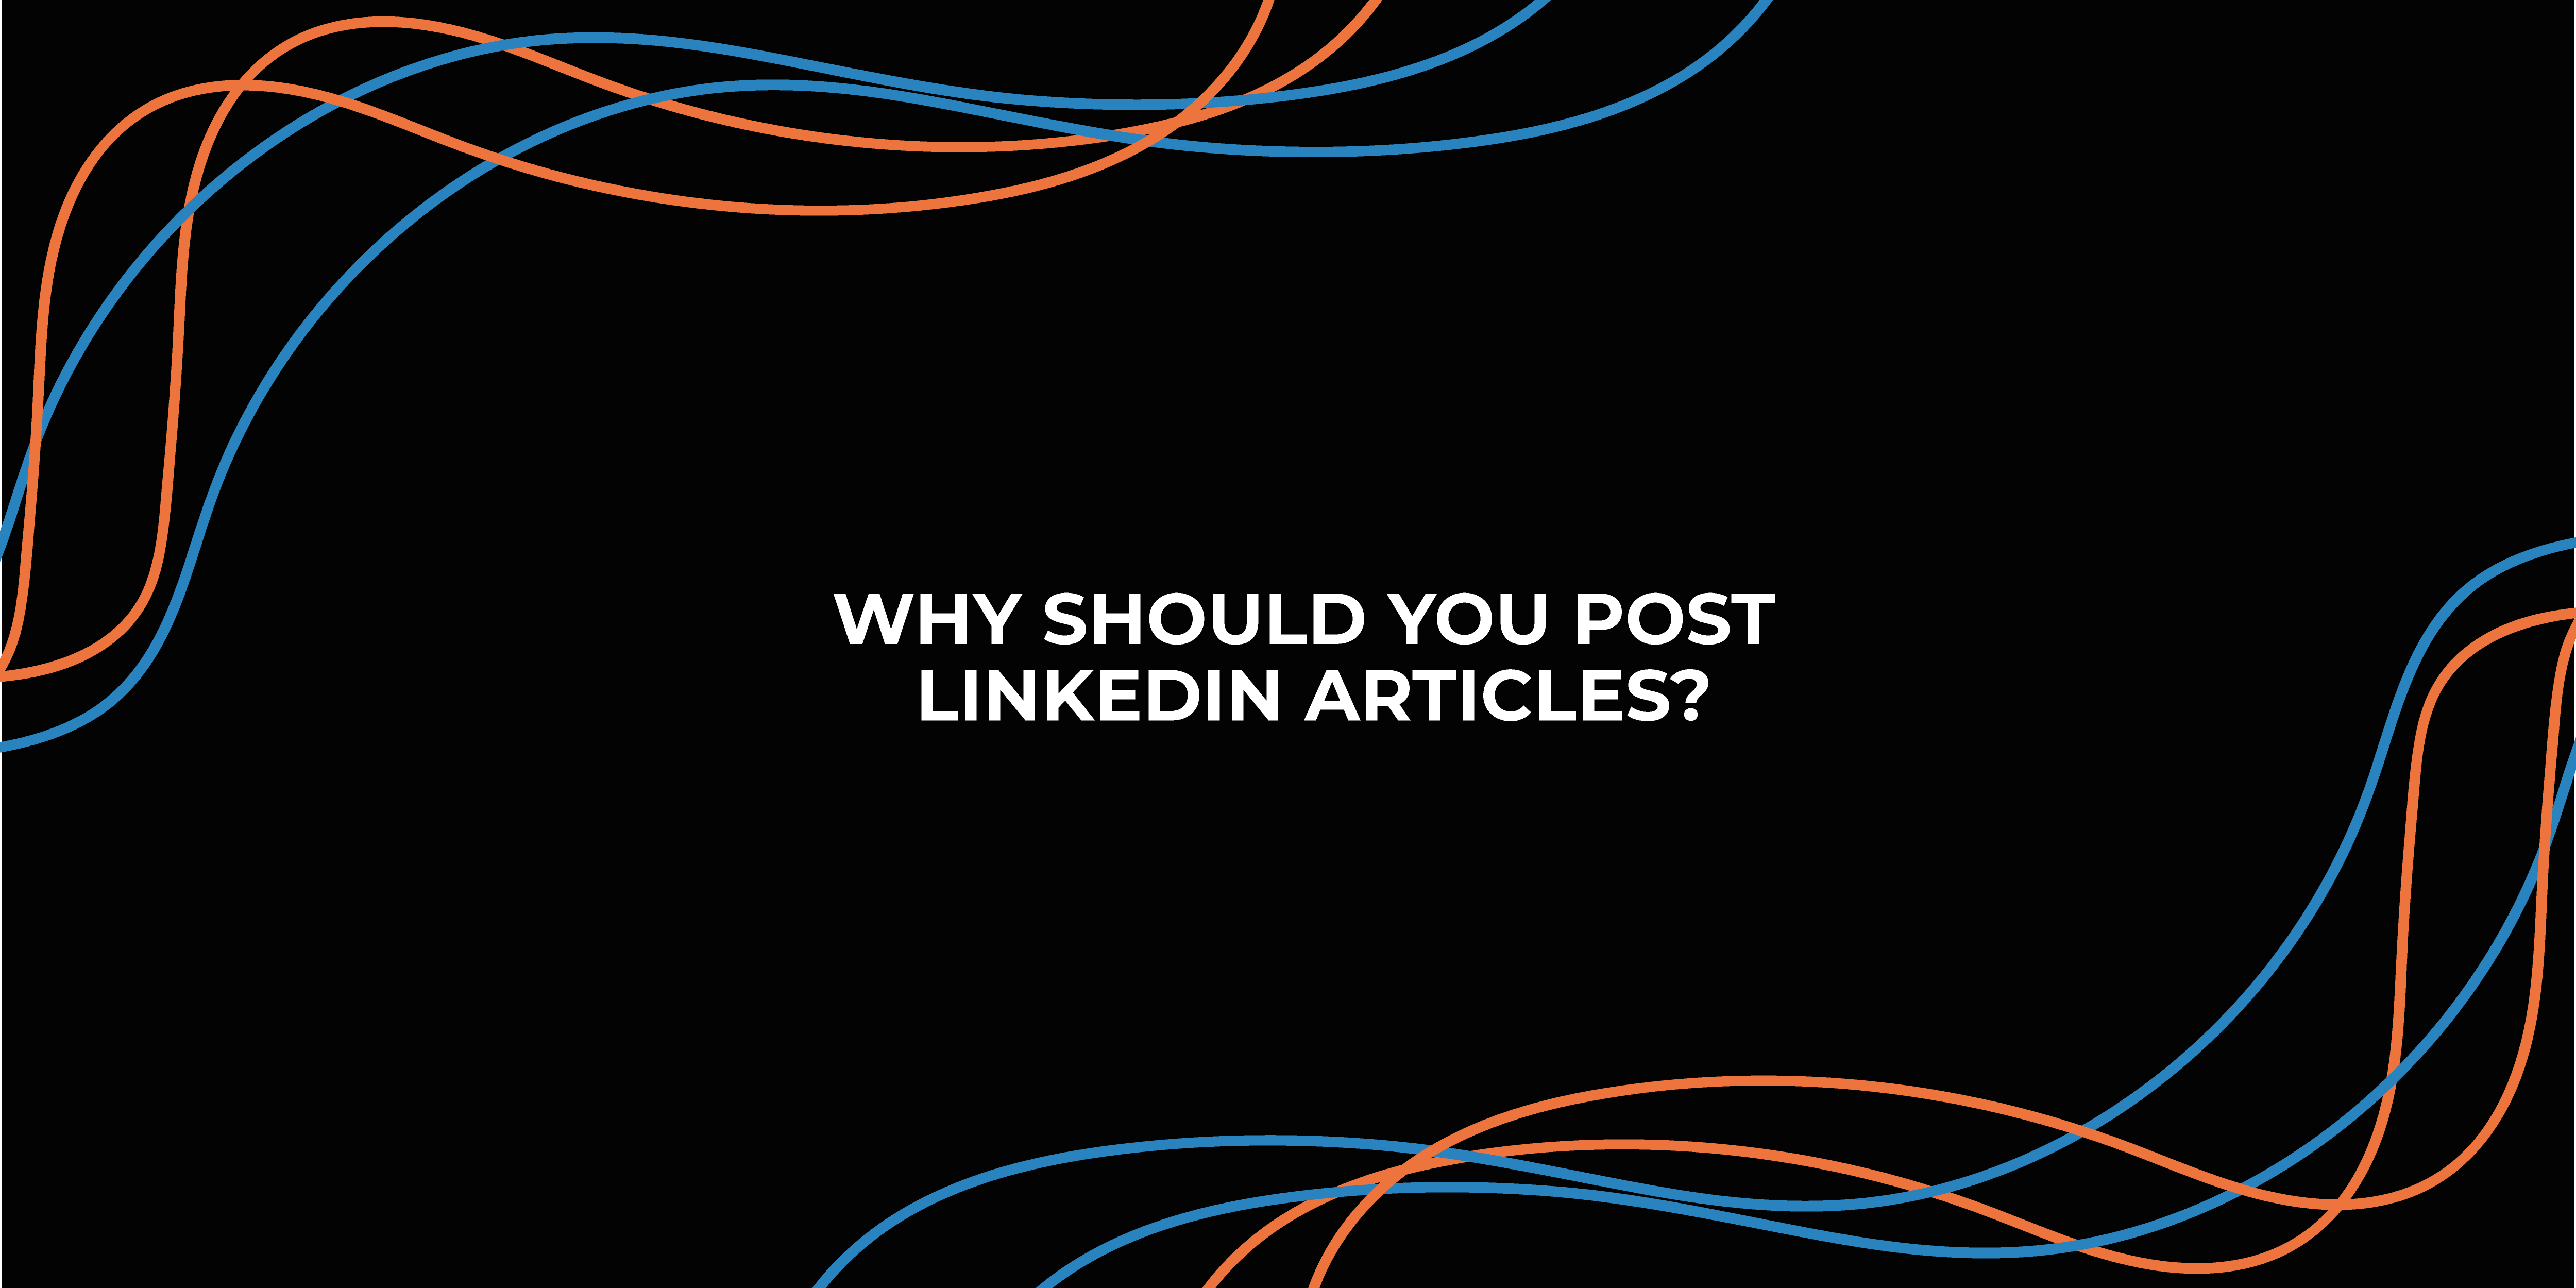 Why should you post LinkedIn Articles?